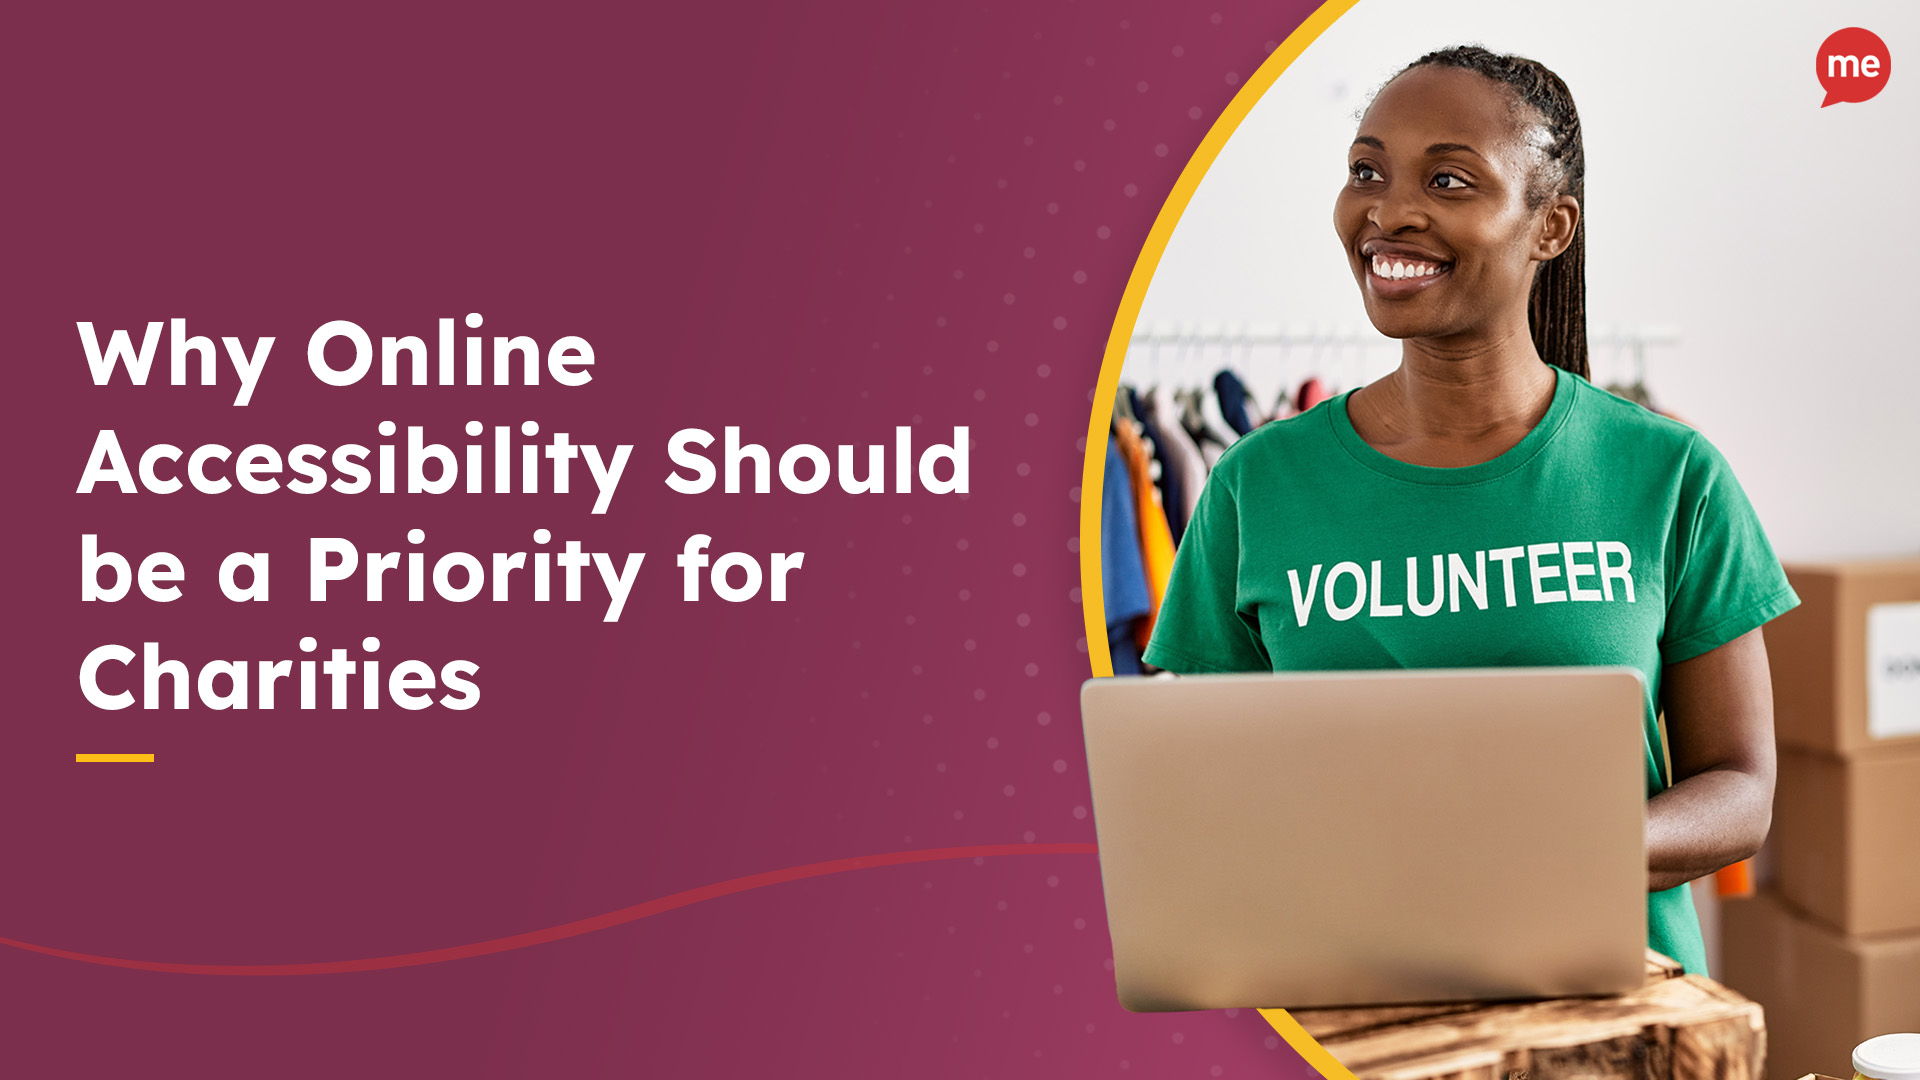 Why Online Accessibility Should be a priority for charities